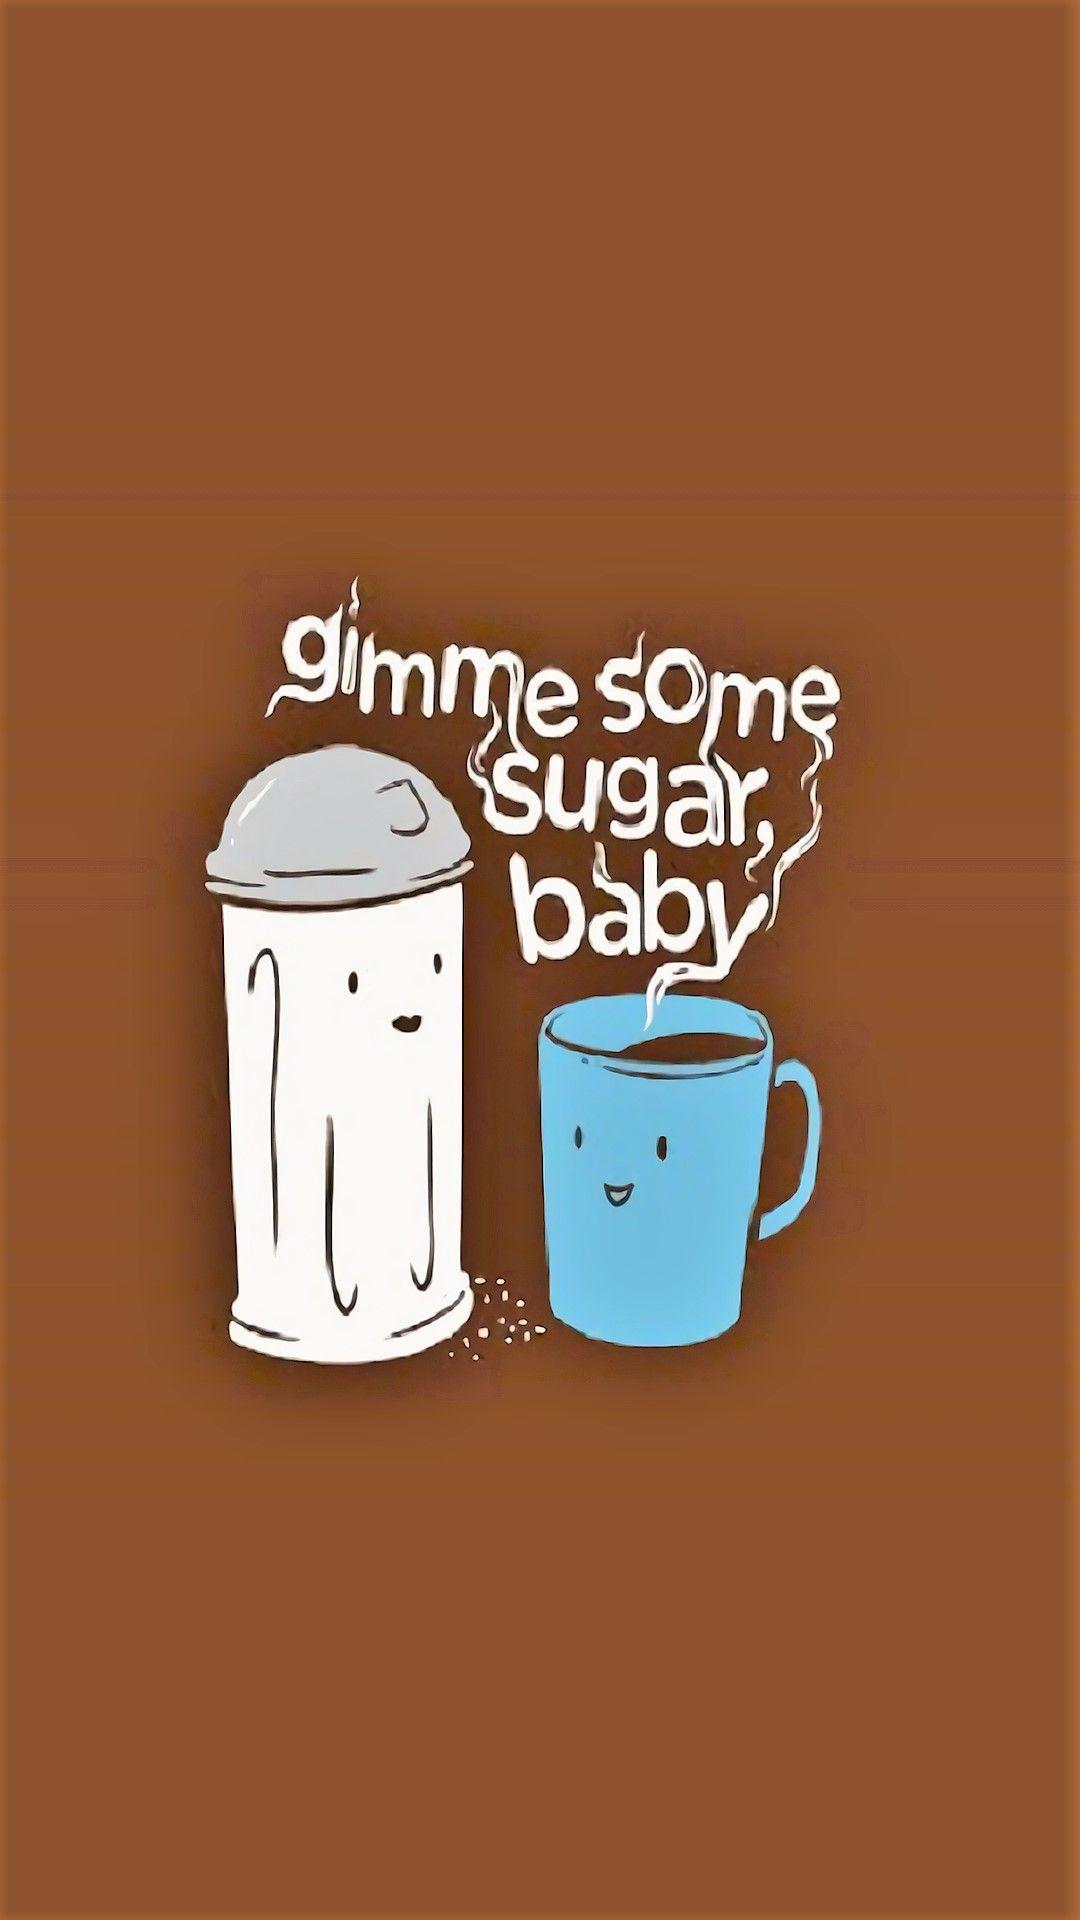 Sugar to see more funny wallpaper that will make your day